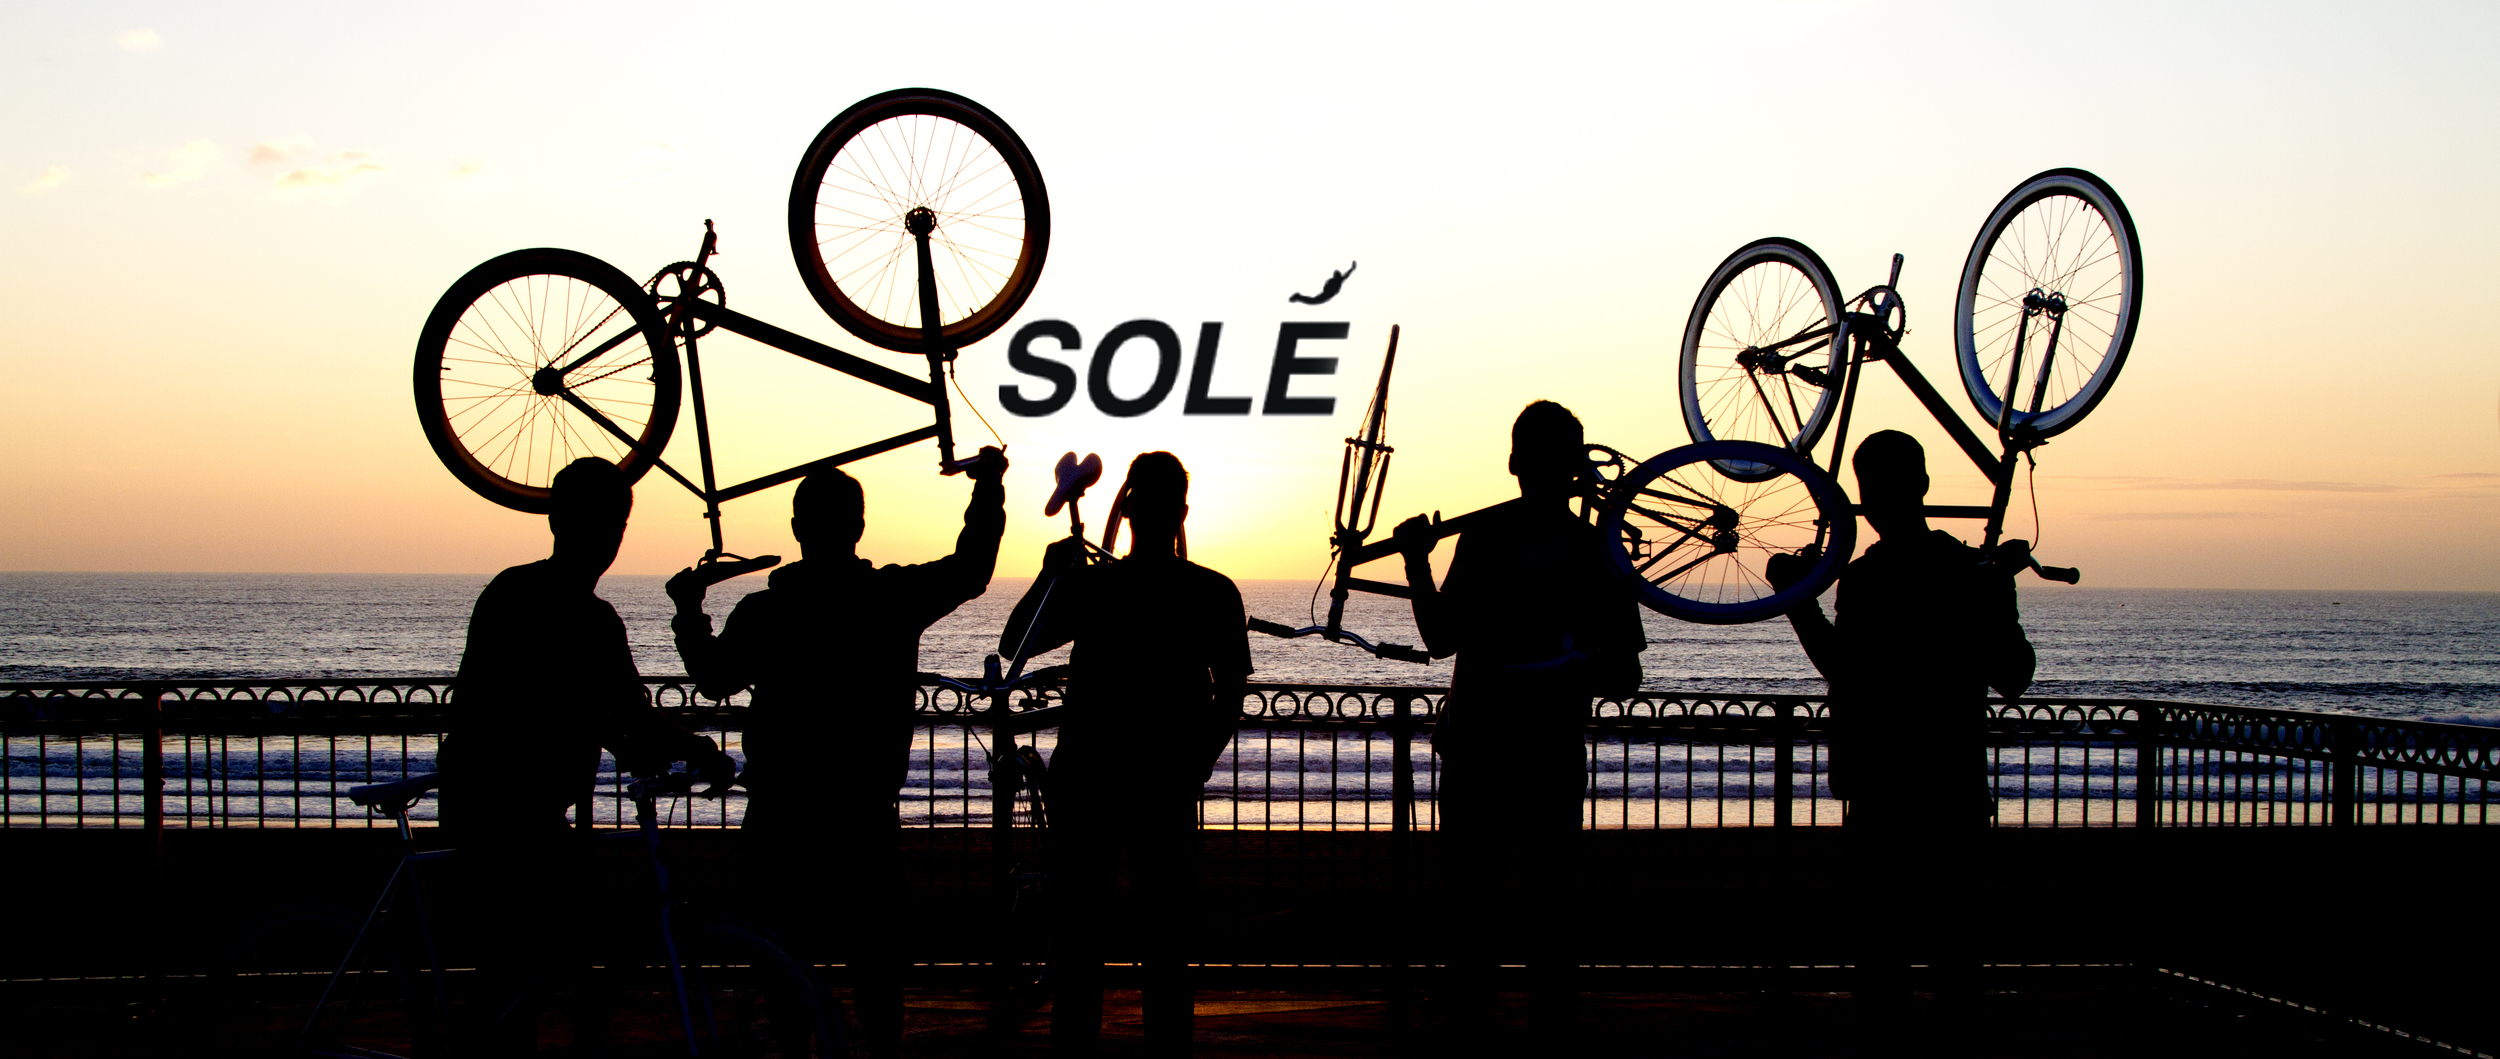 Sole poster color.jpg